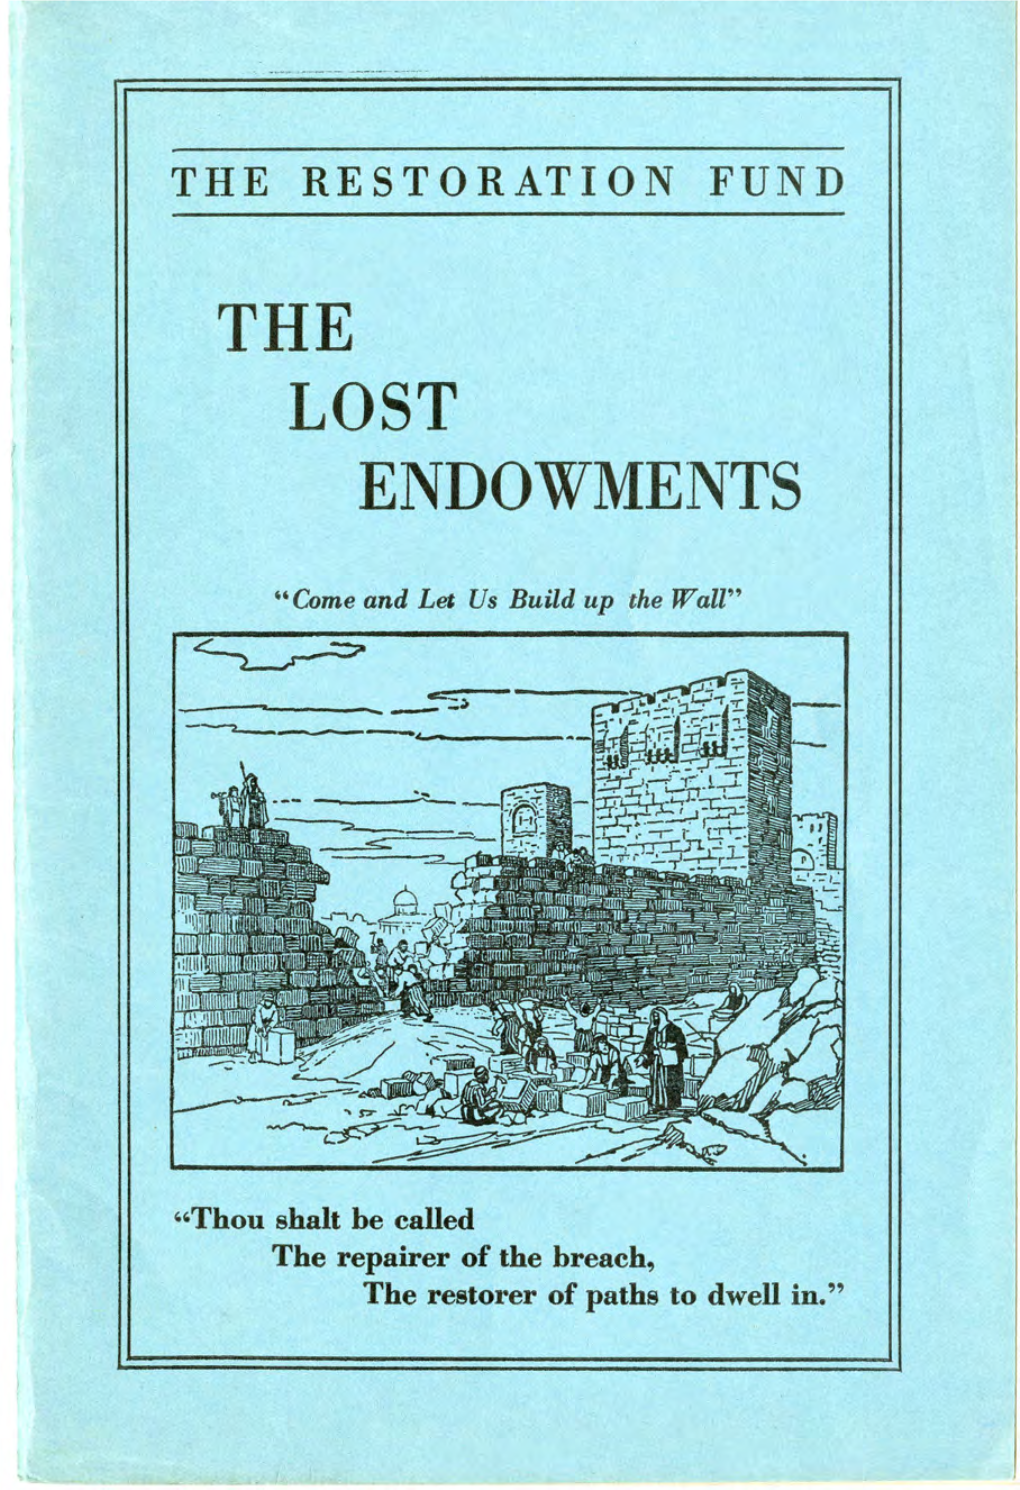 The Lost Endowments